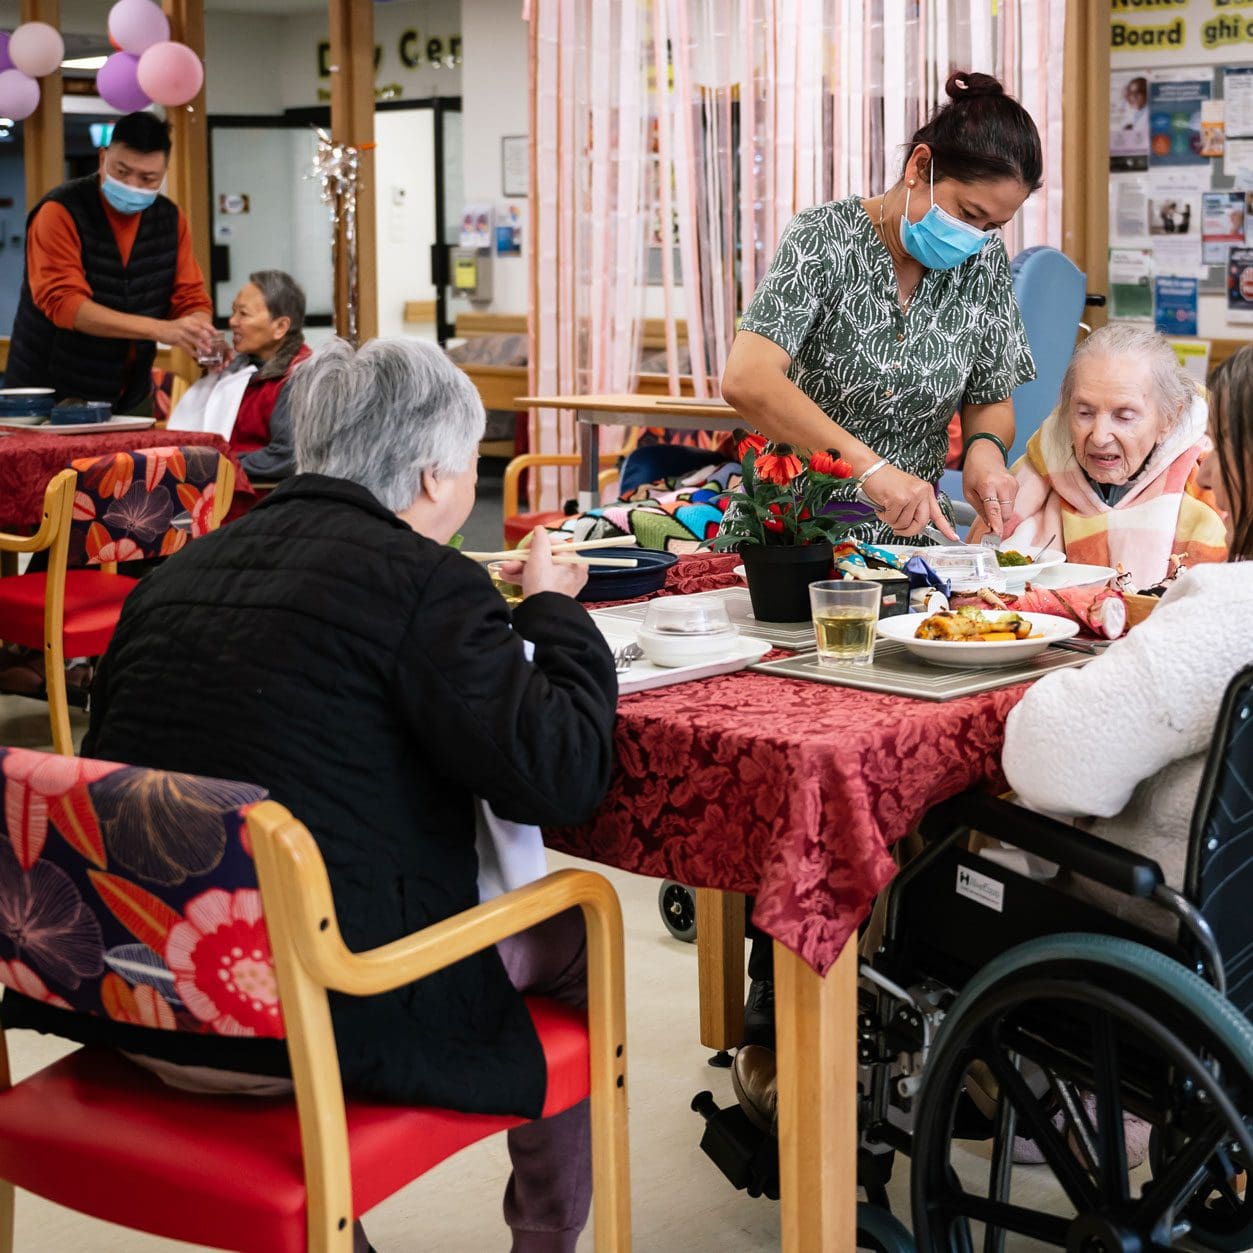 A group of people in wheelchairs at a nursing home eating at a table.